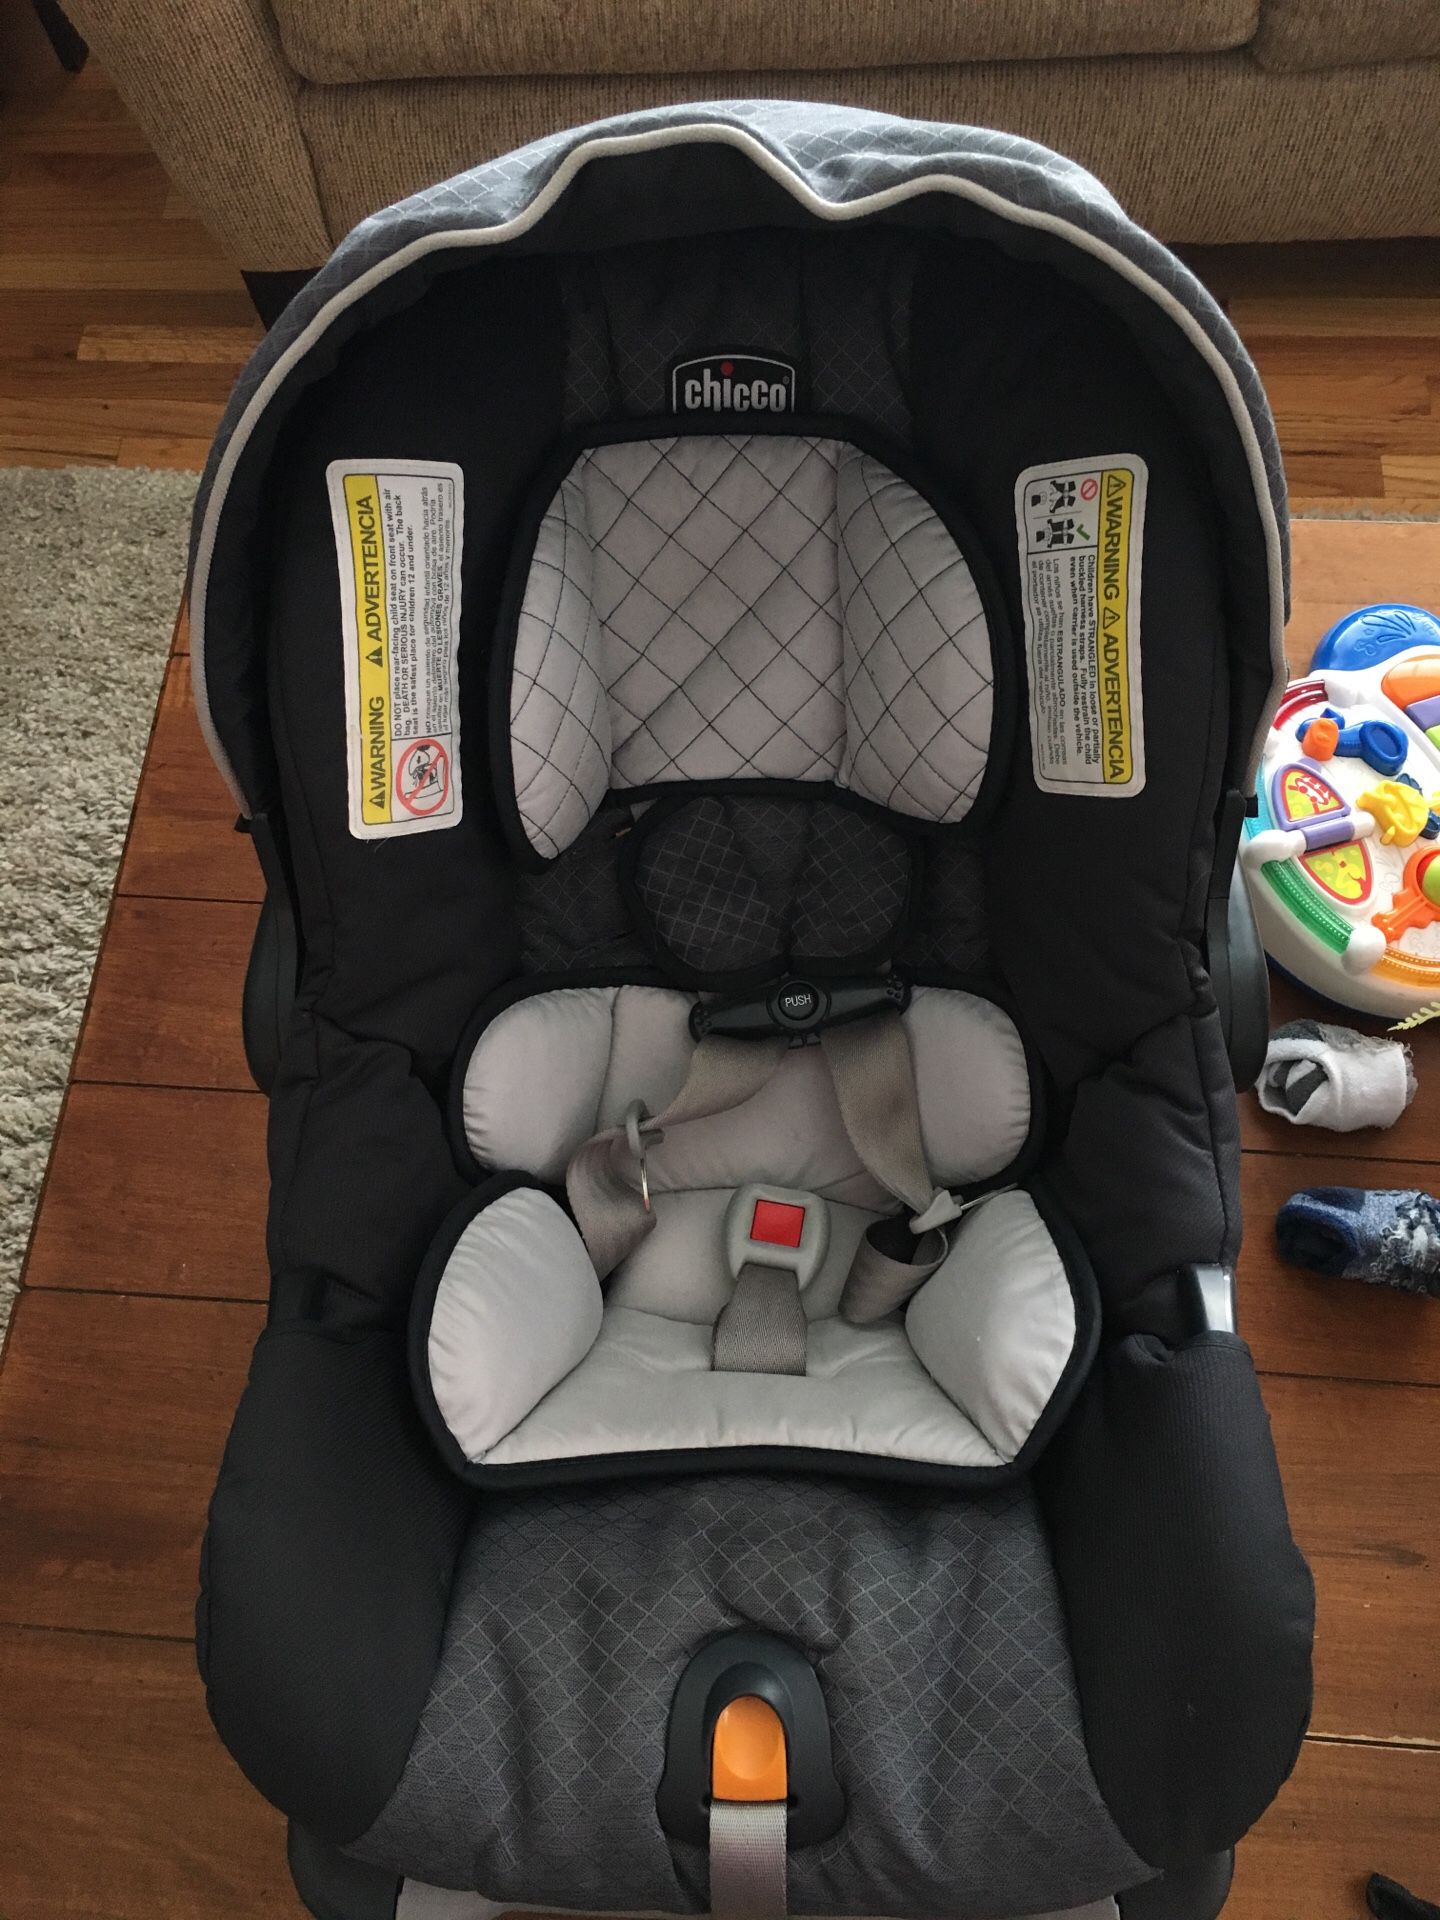 Chicco Keyfit 30 infant car seat and base